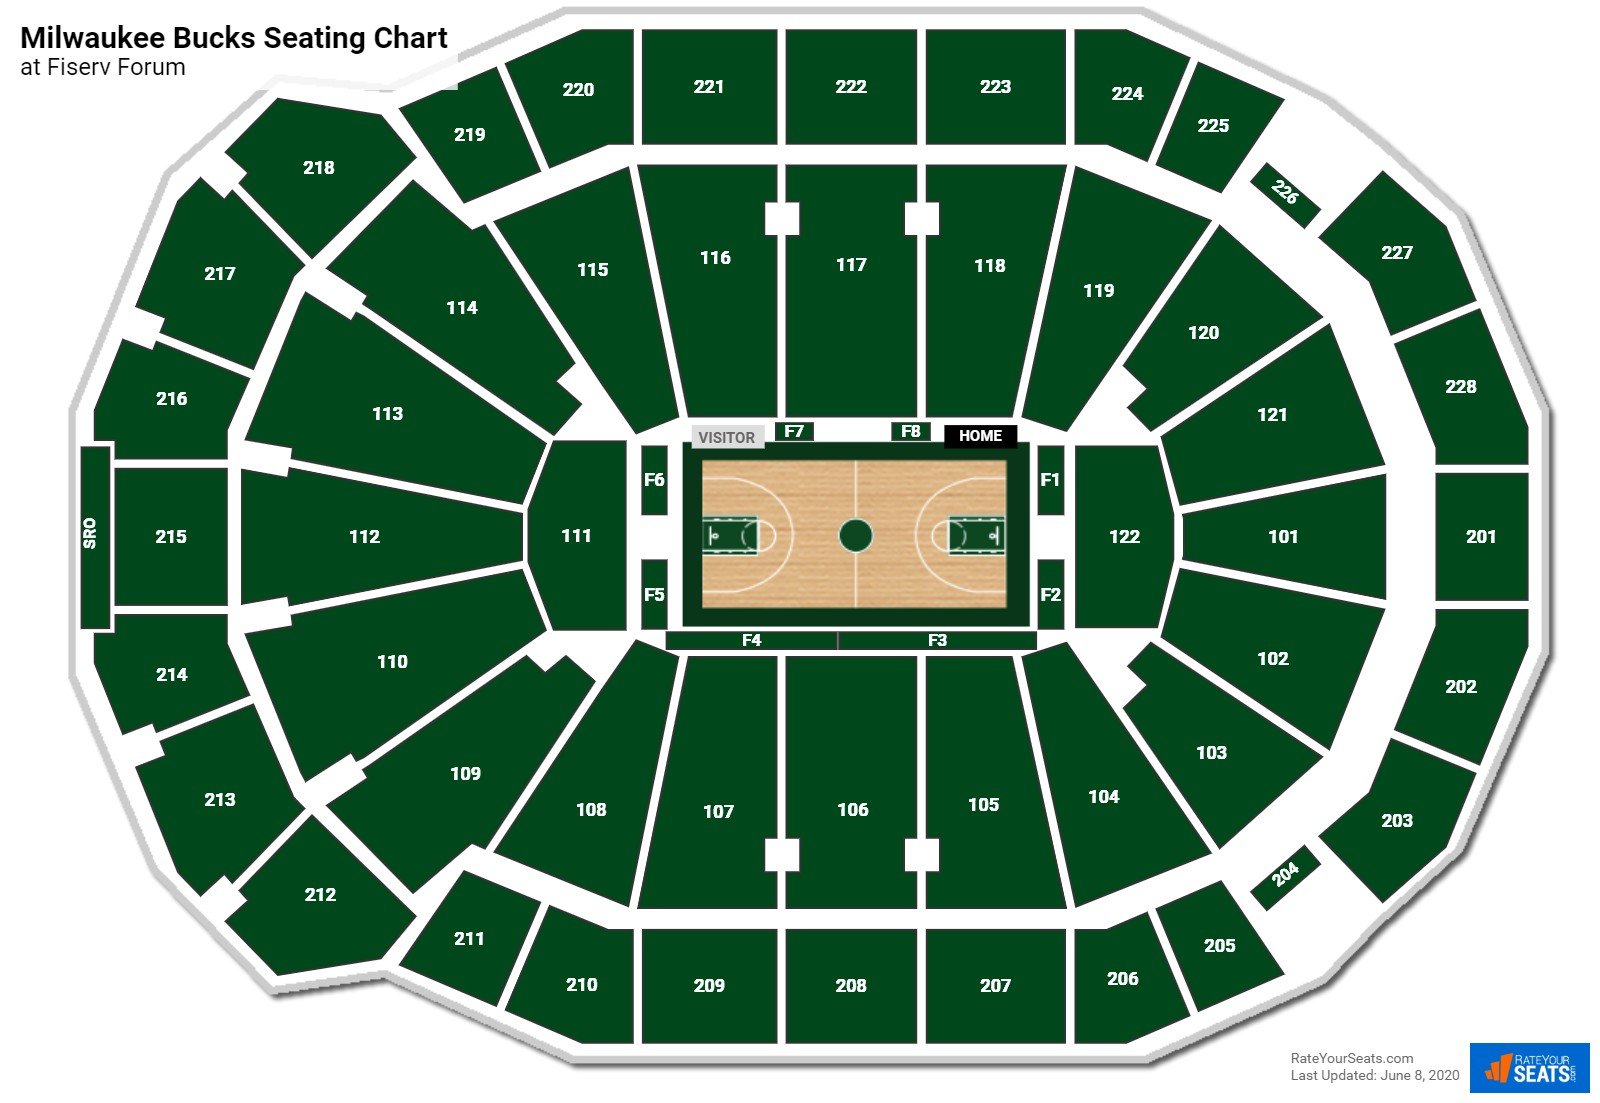 Bucks & Marquette Seating Charts at Fiserv Forum